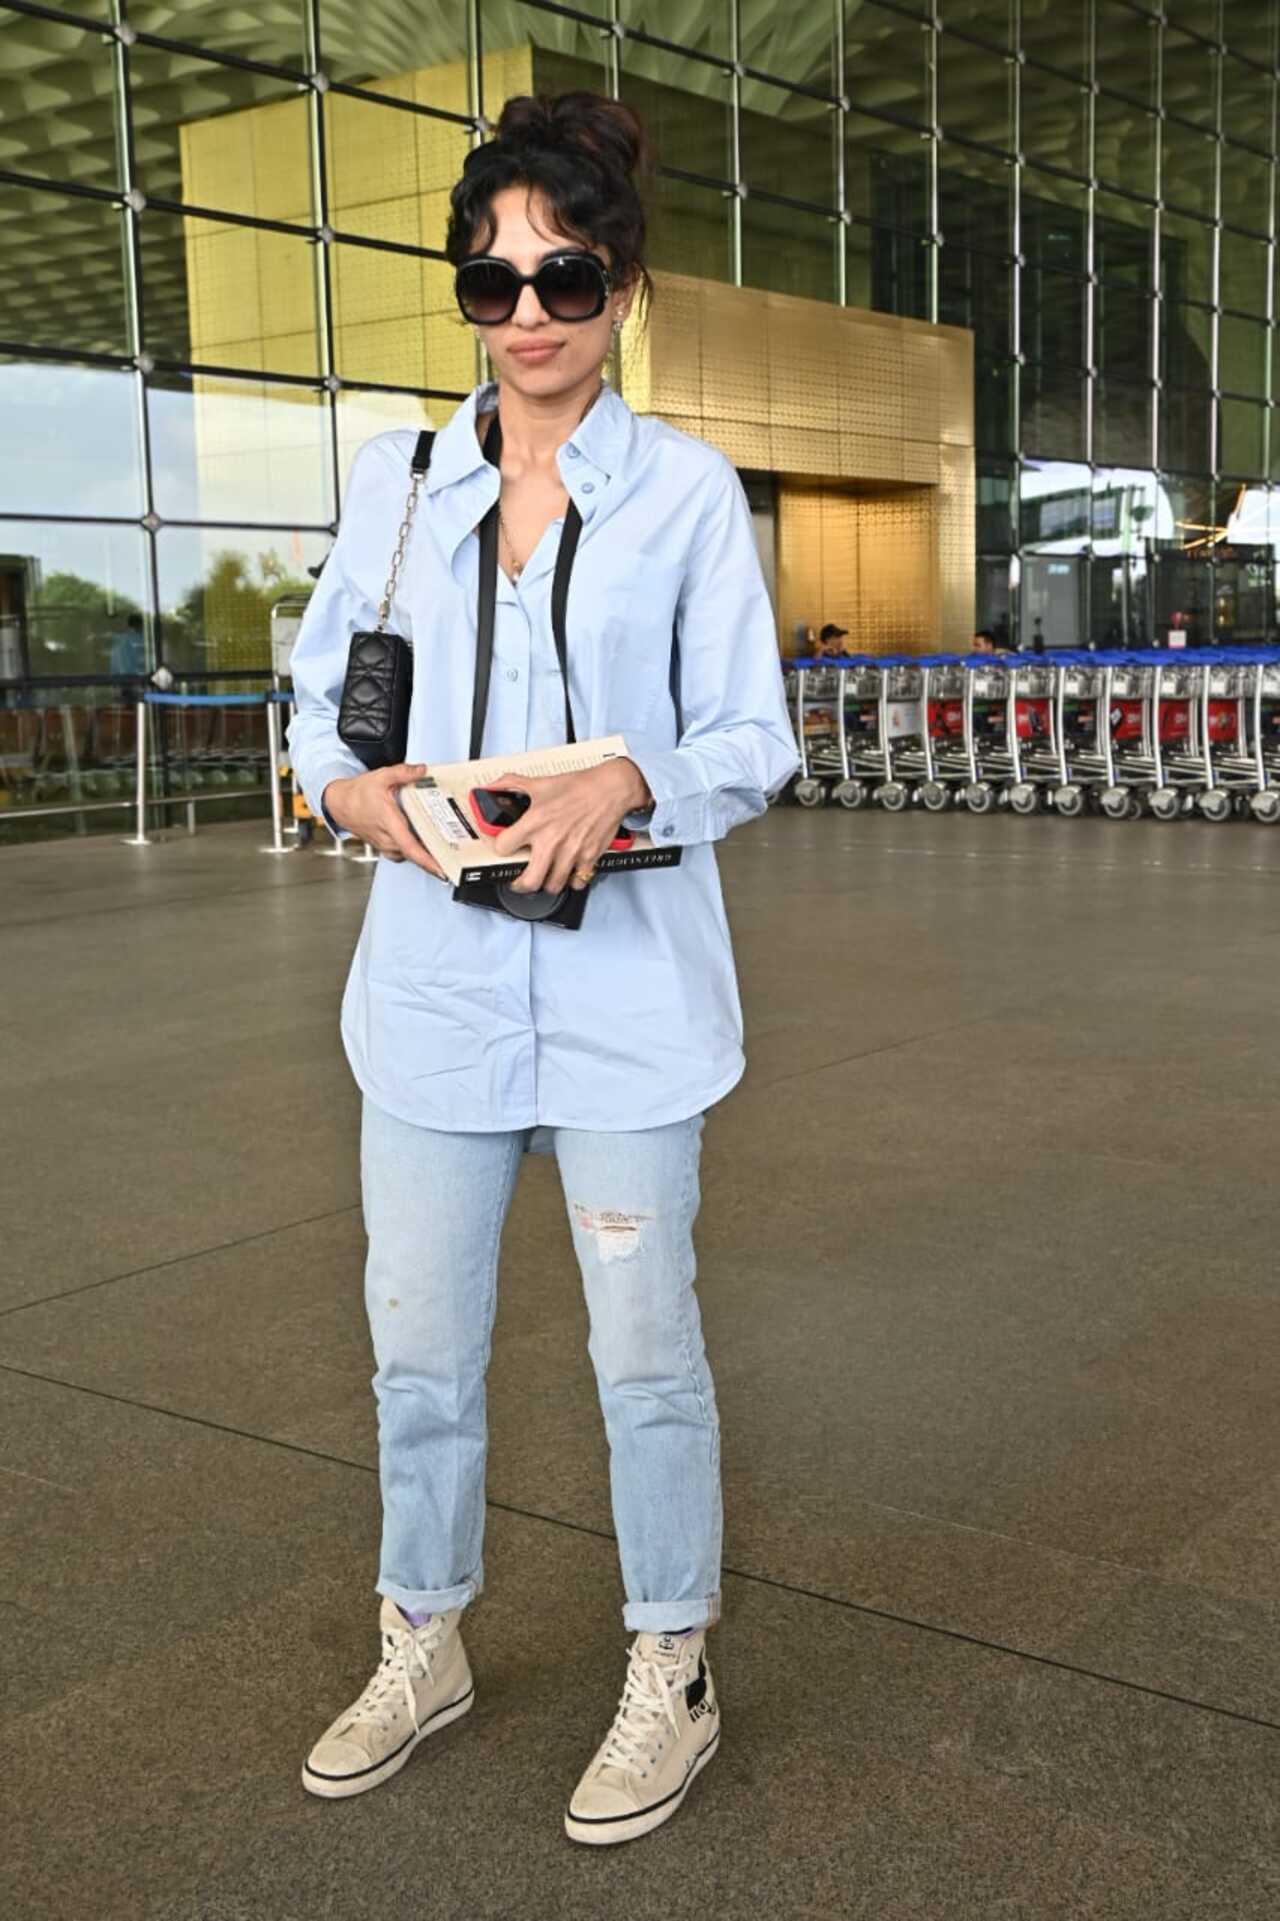 Sobhita Dhulipala was also at the airport